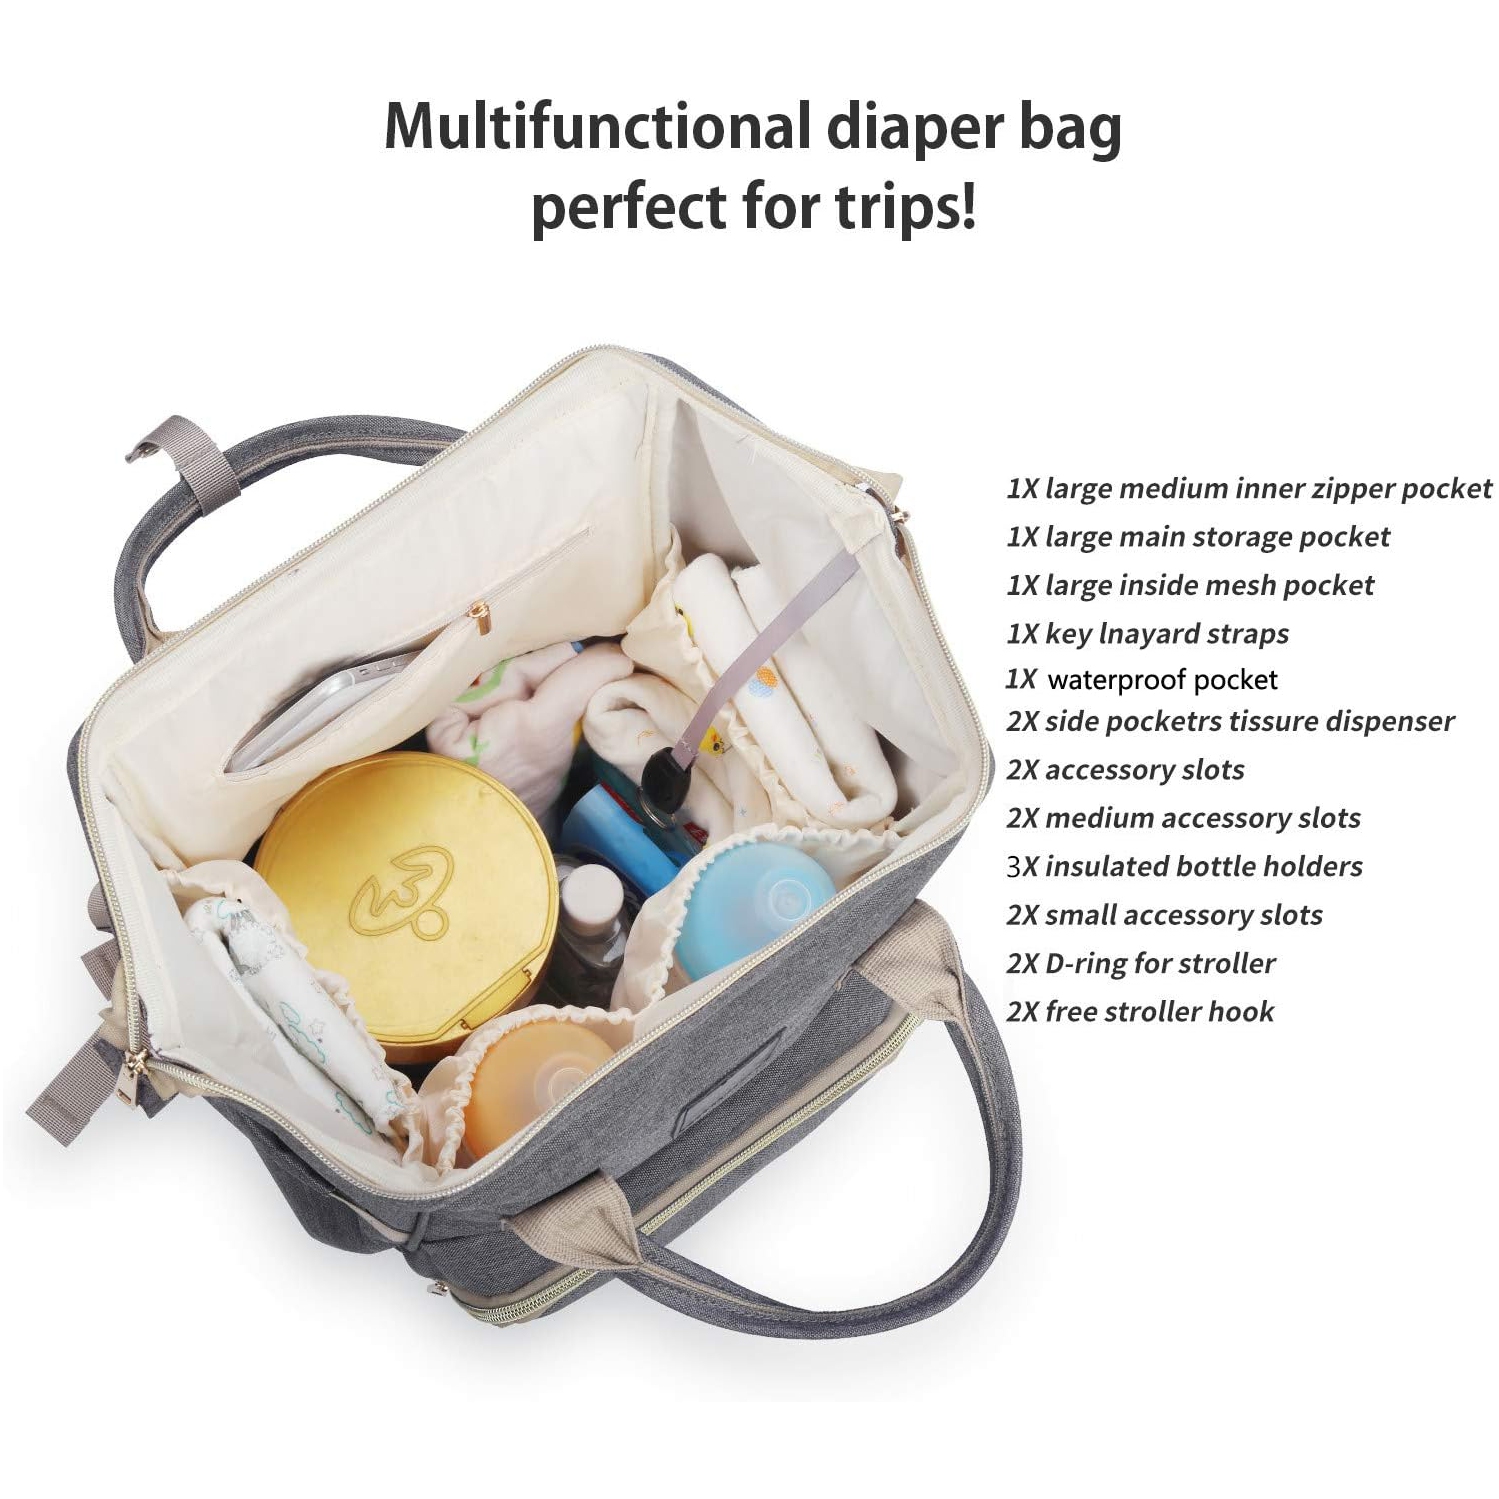 MUIFA Diaper Bag Multi-Function Waterproof Travel Backpack Nappy Bag for  Baby Care with Insulated Pockets